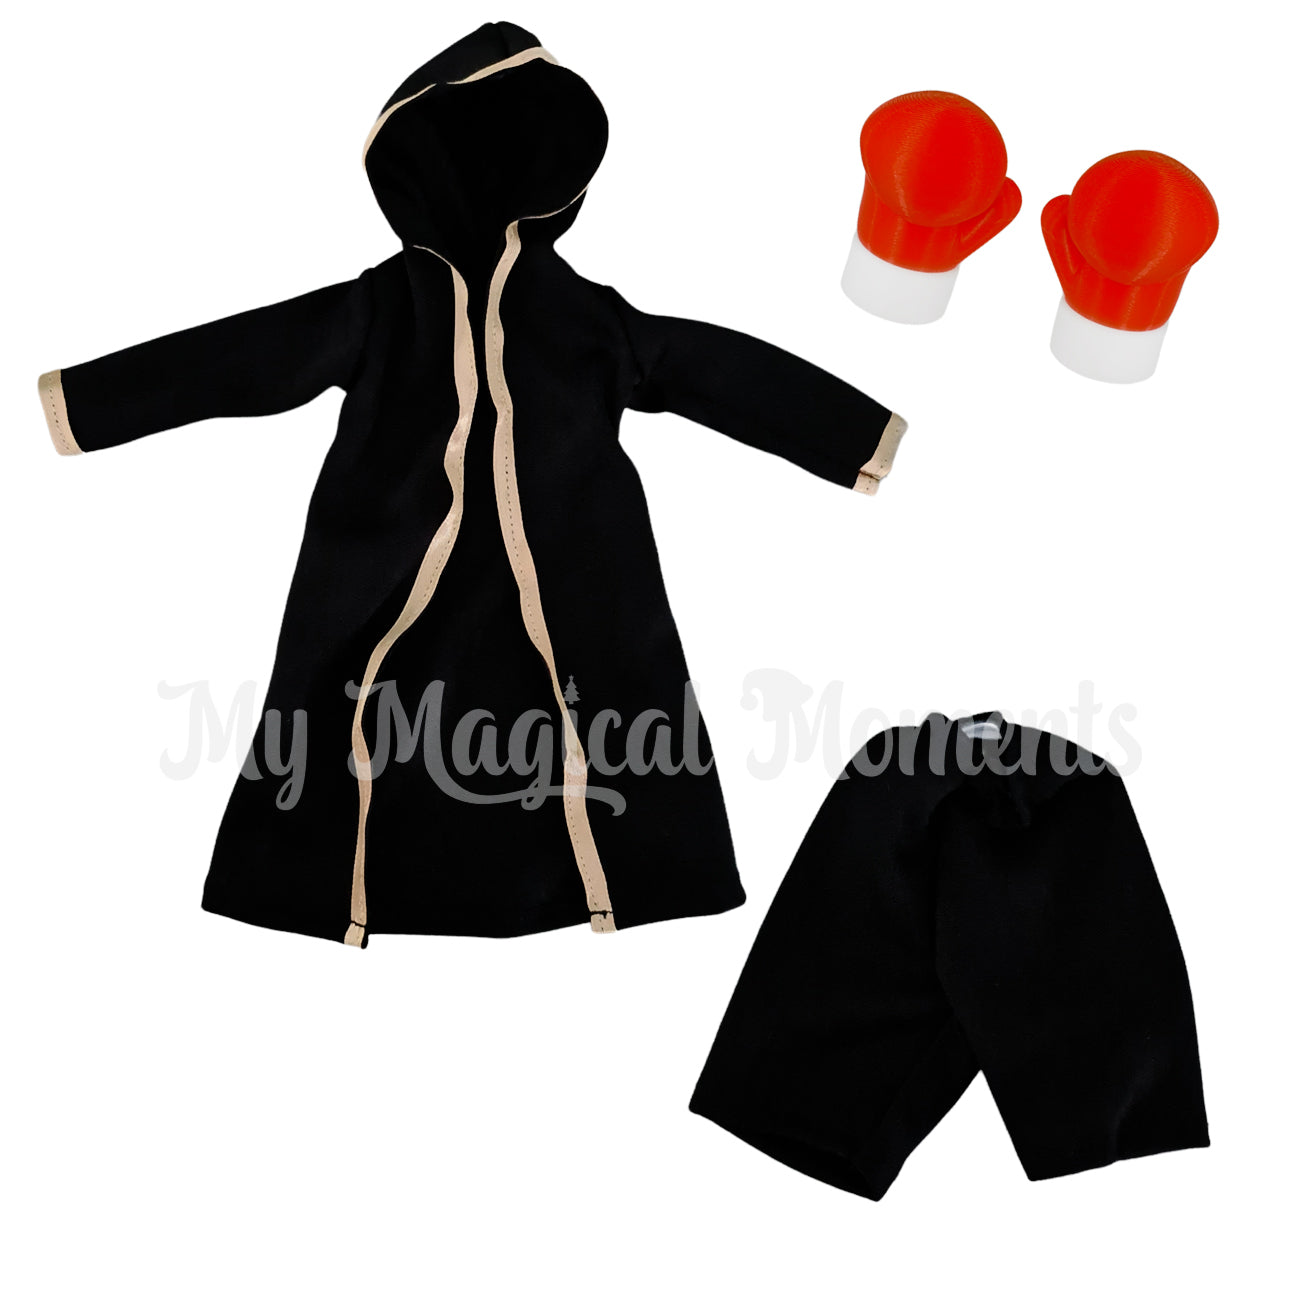 Elf boxing costume with black robe, shorts and boxing gloves